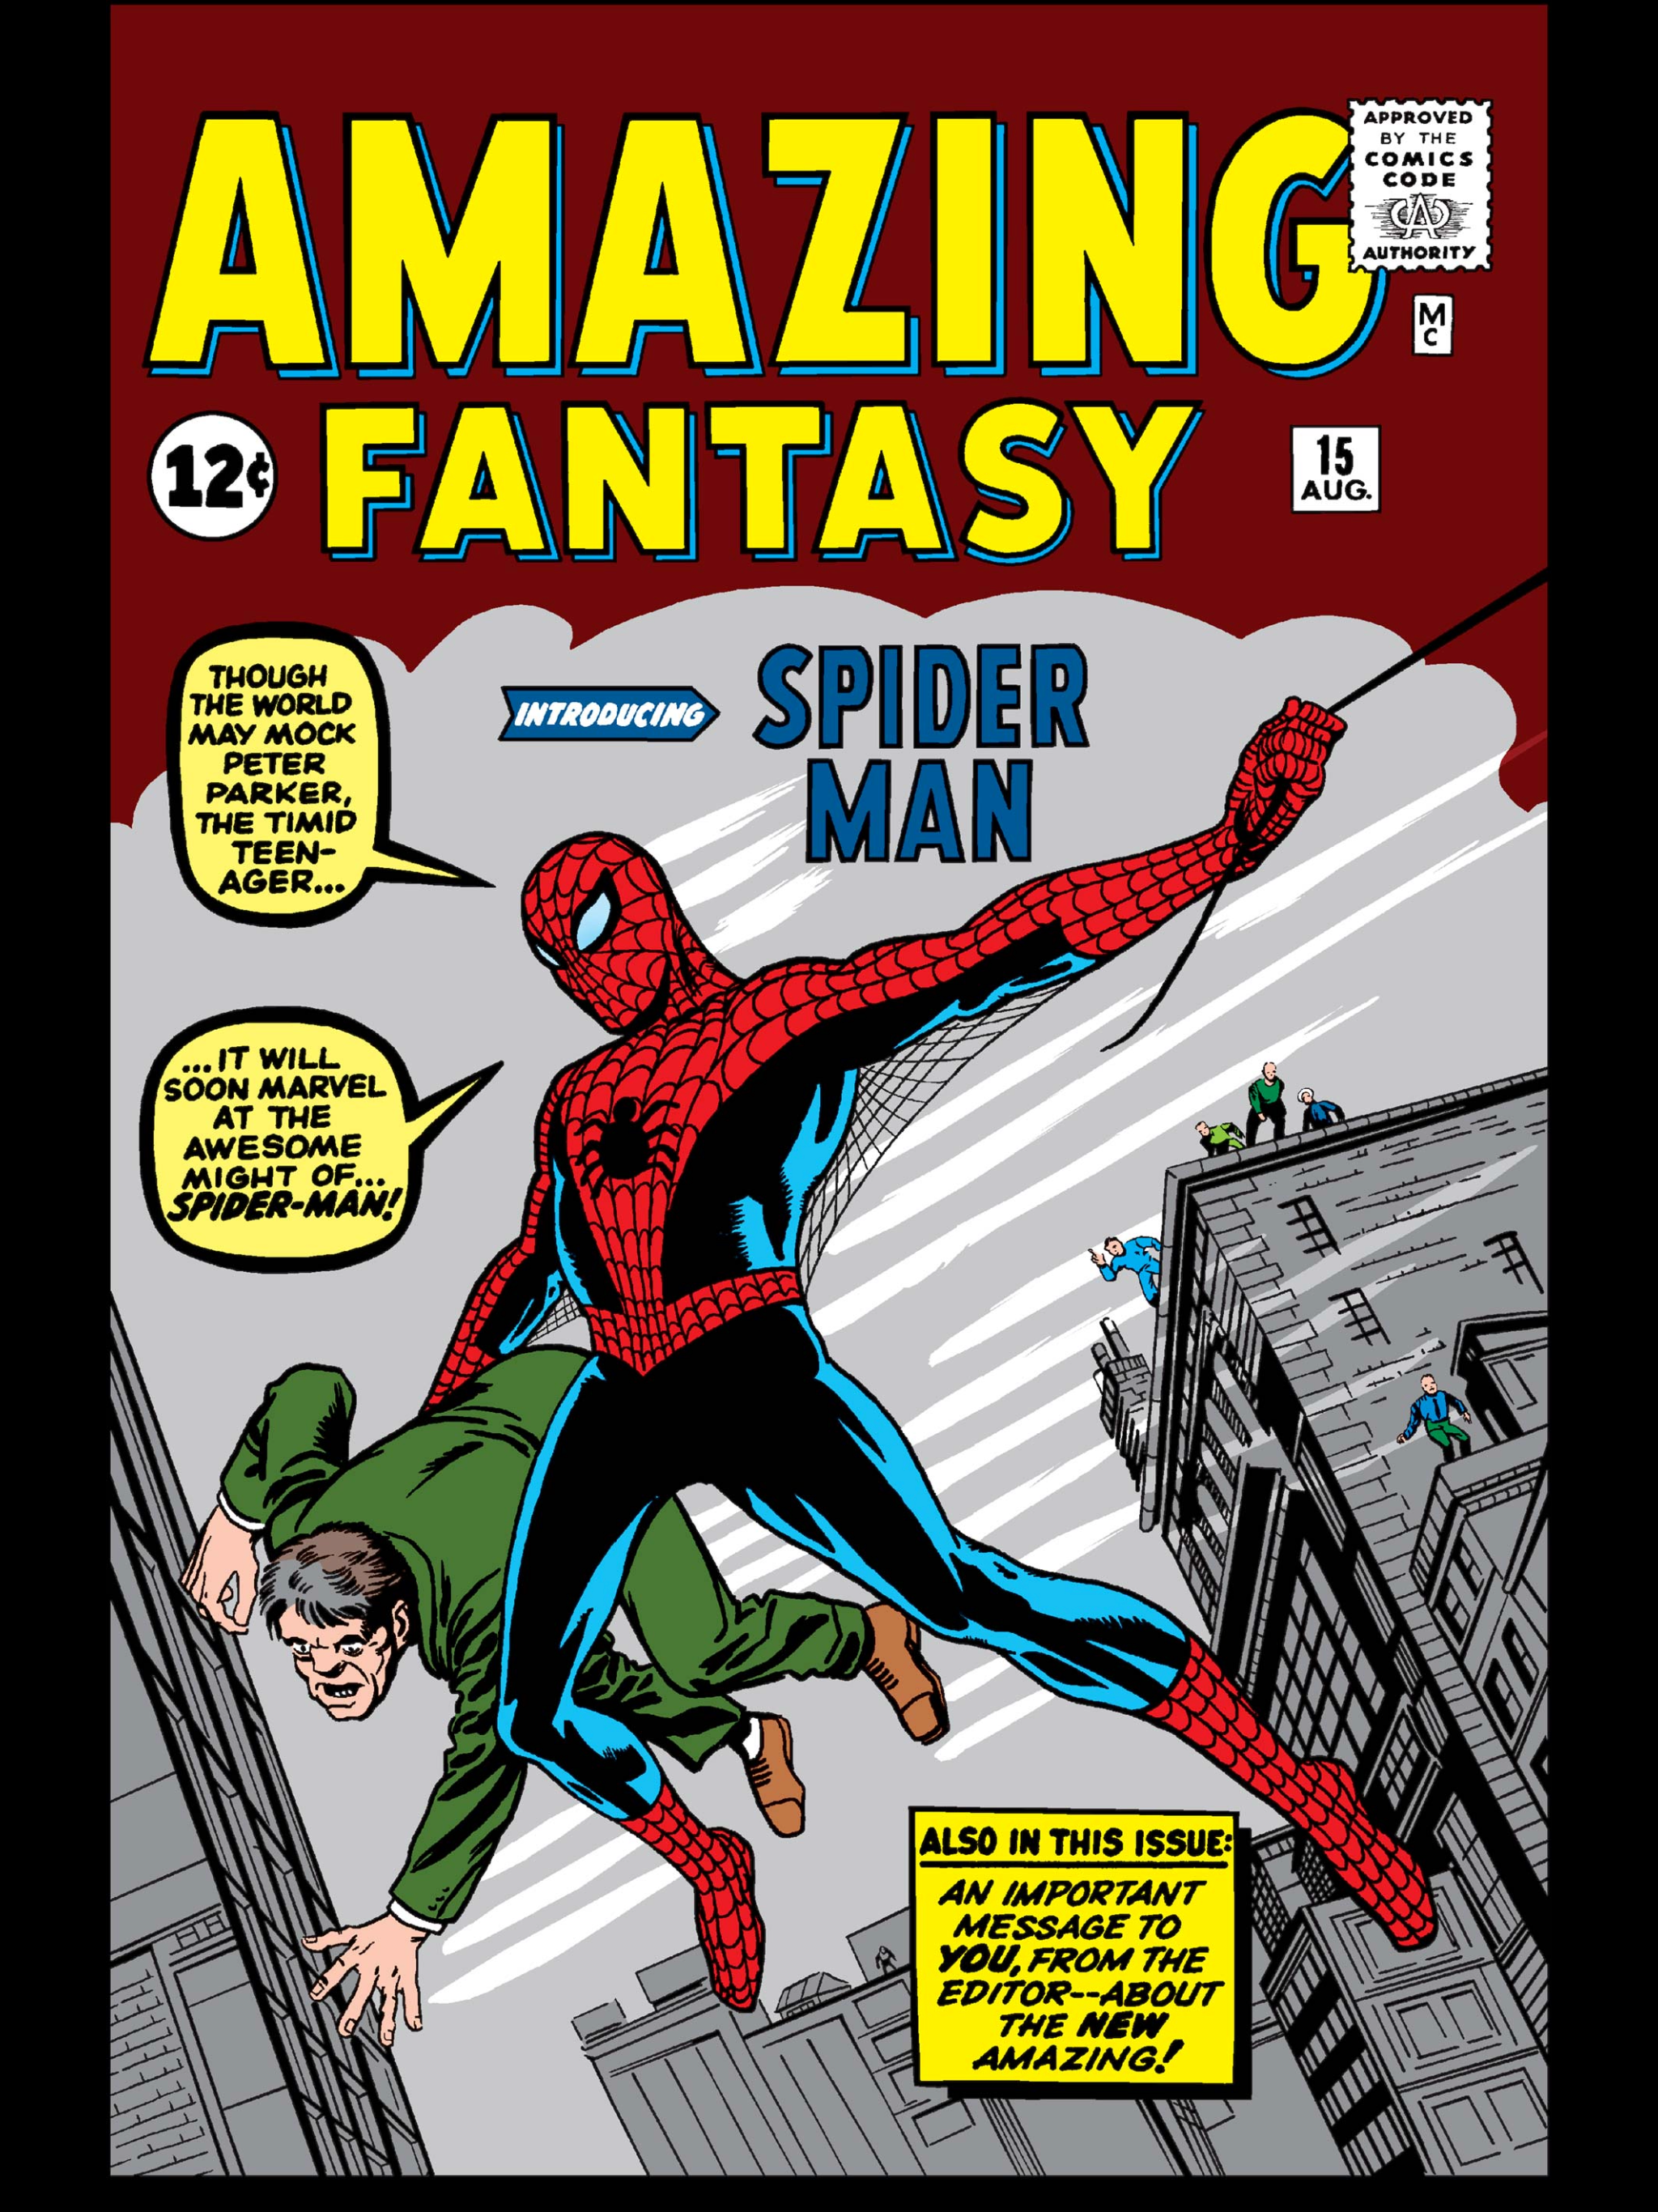 Spider-Man's first appearance in Amazing Fantasy.